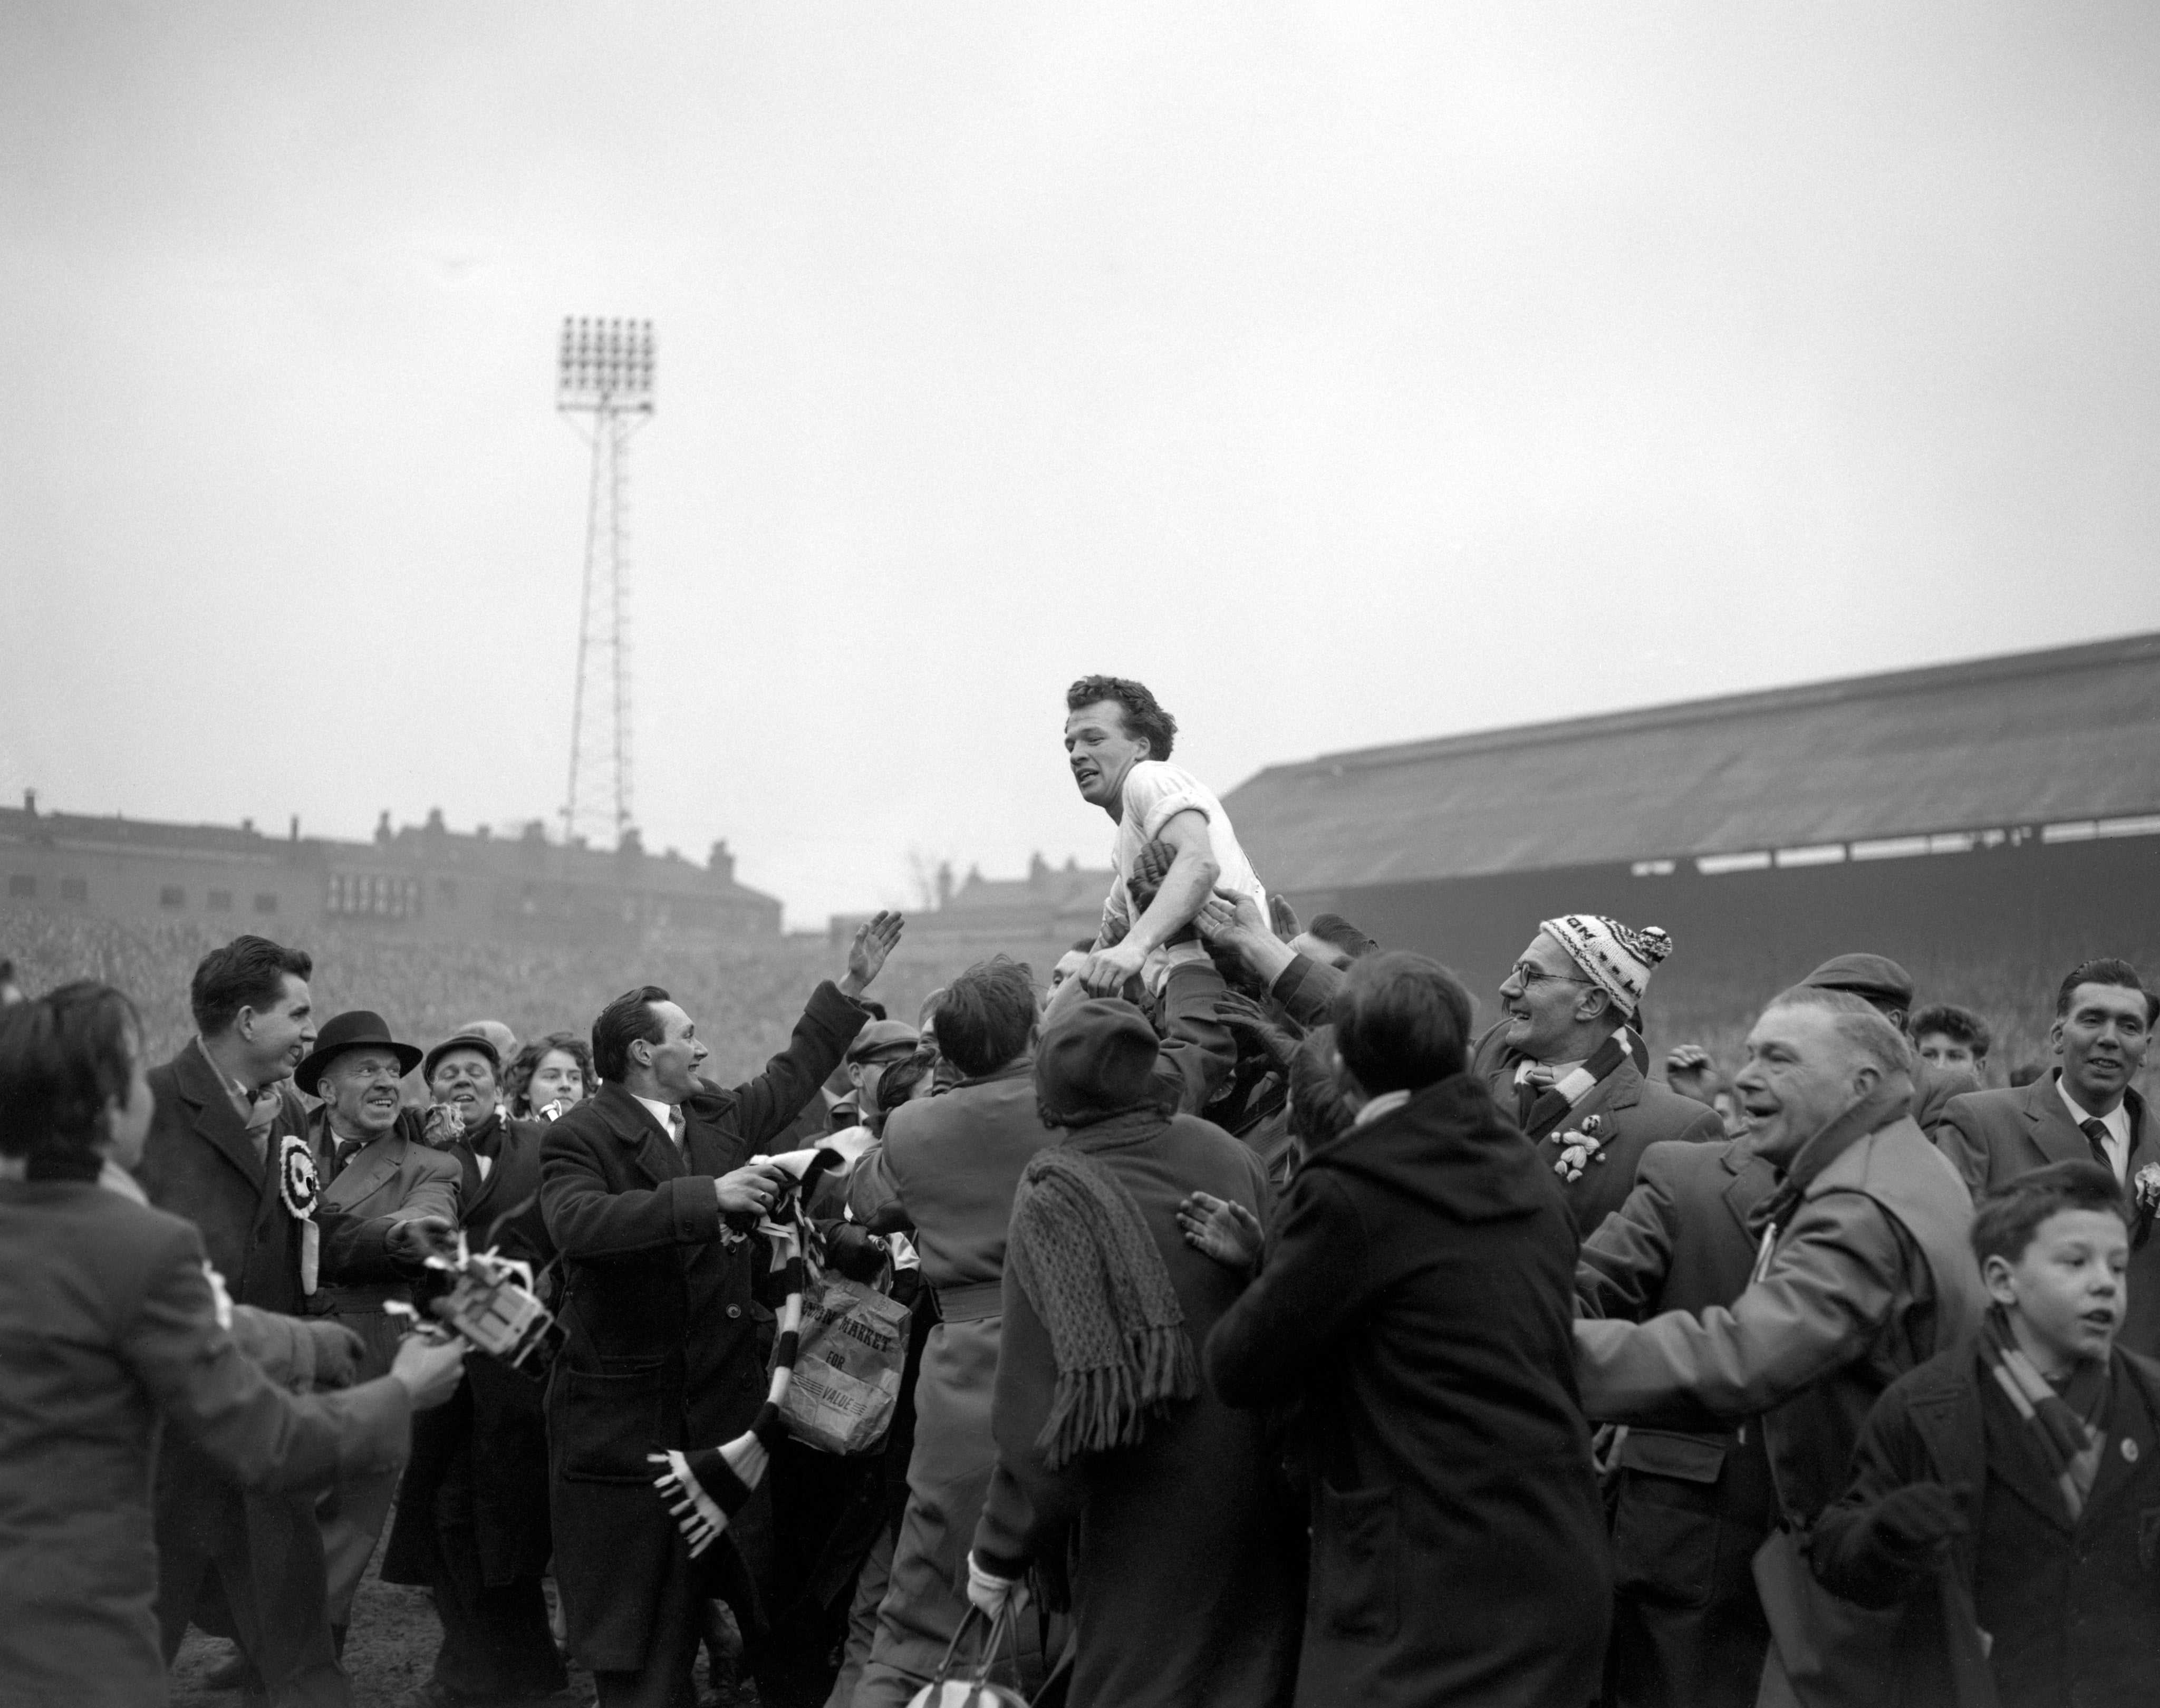 Billy Bingham is held aloft by fans after scoring the goal which sent Luton to the 1959 FA Cup final (PA).